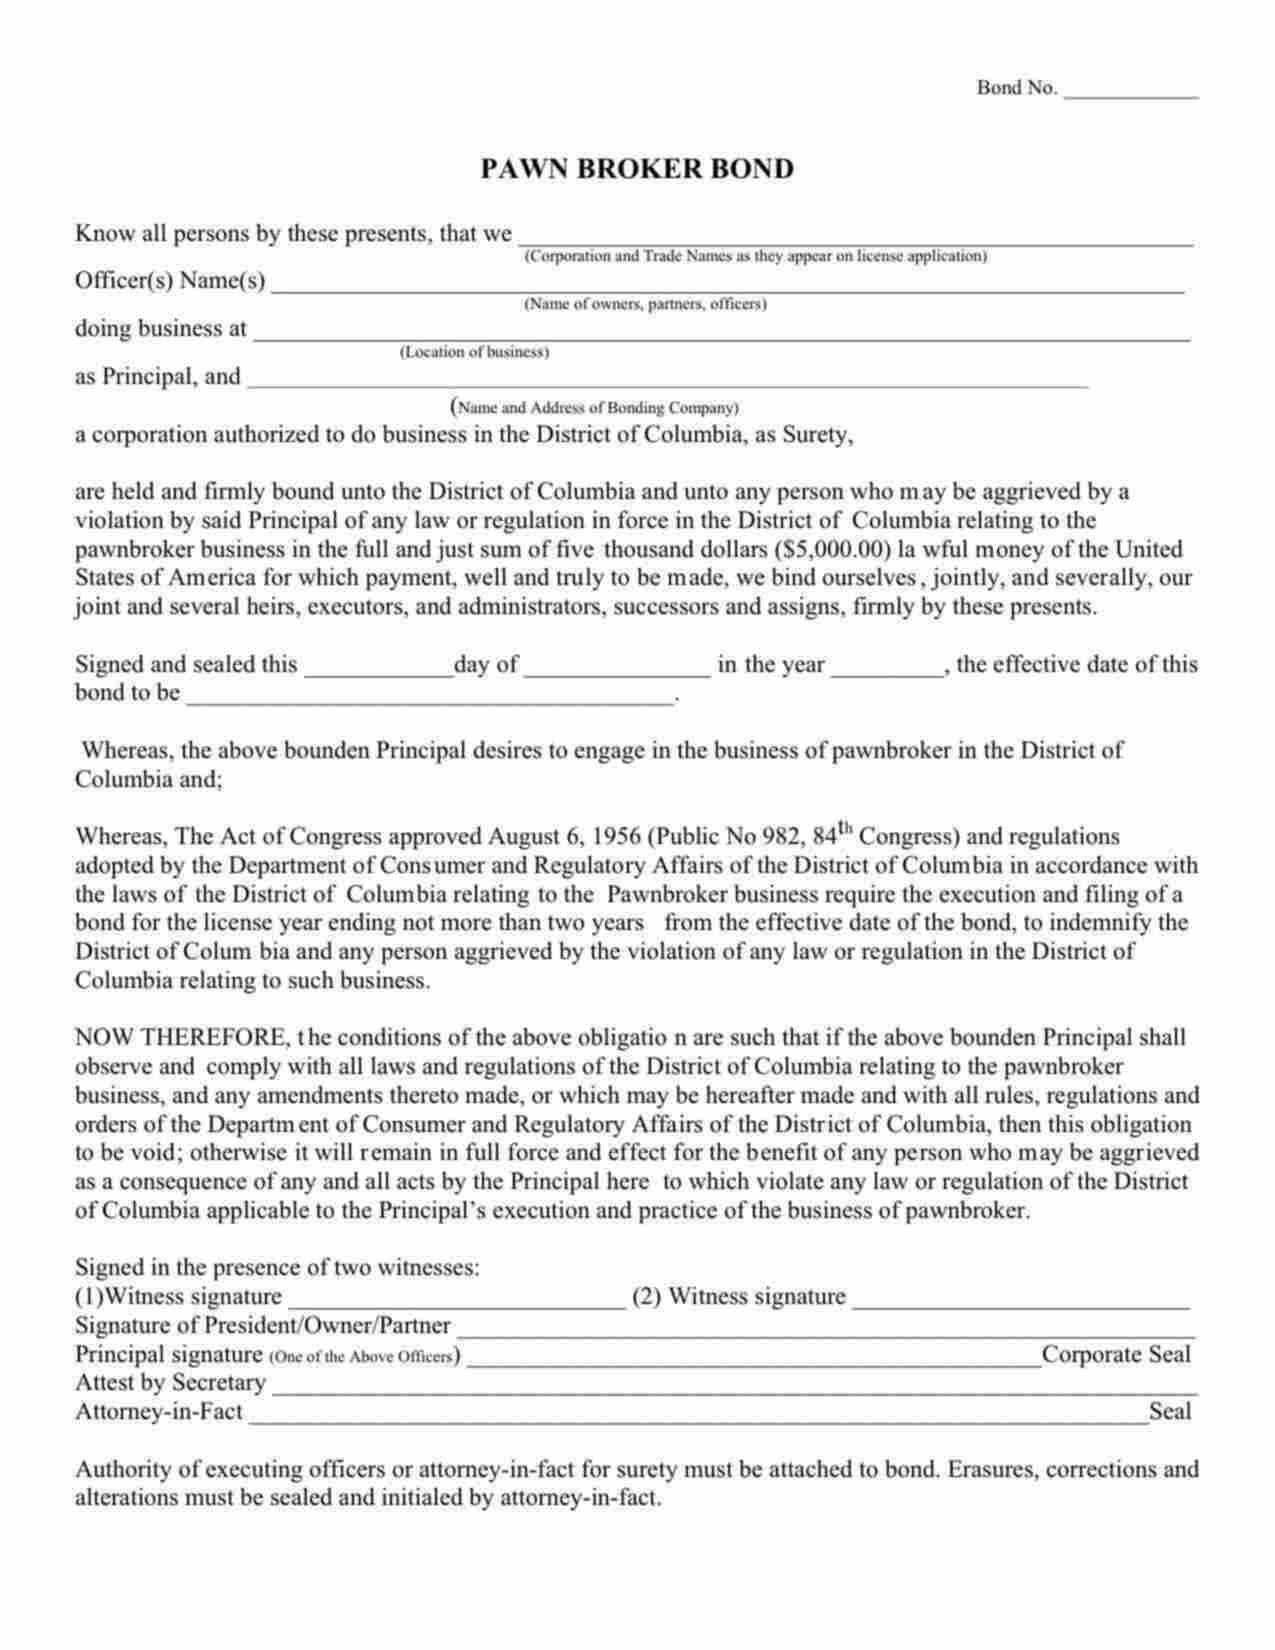 District of Columbia Pawn Broker Bond Form